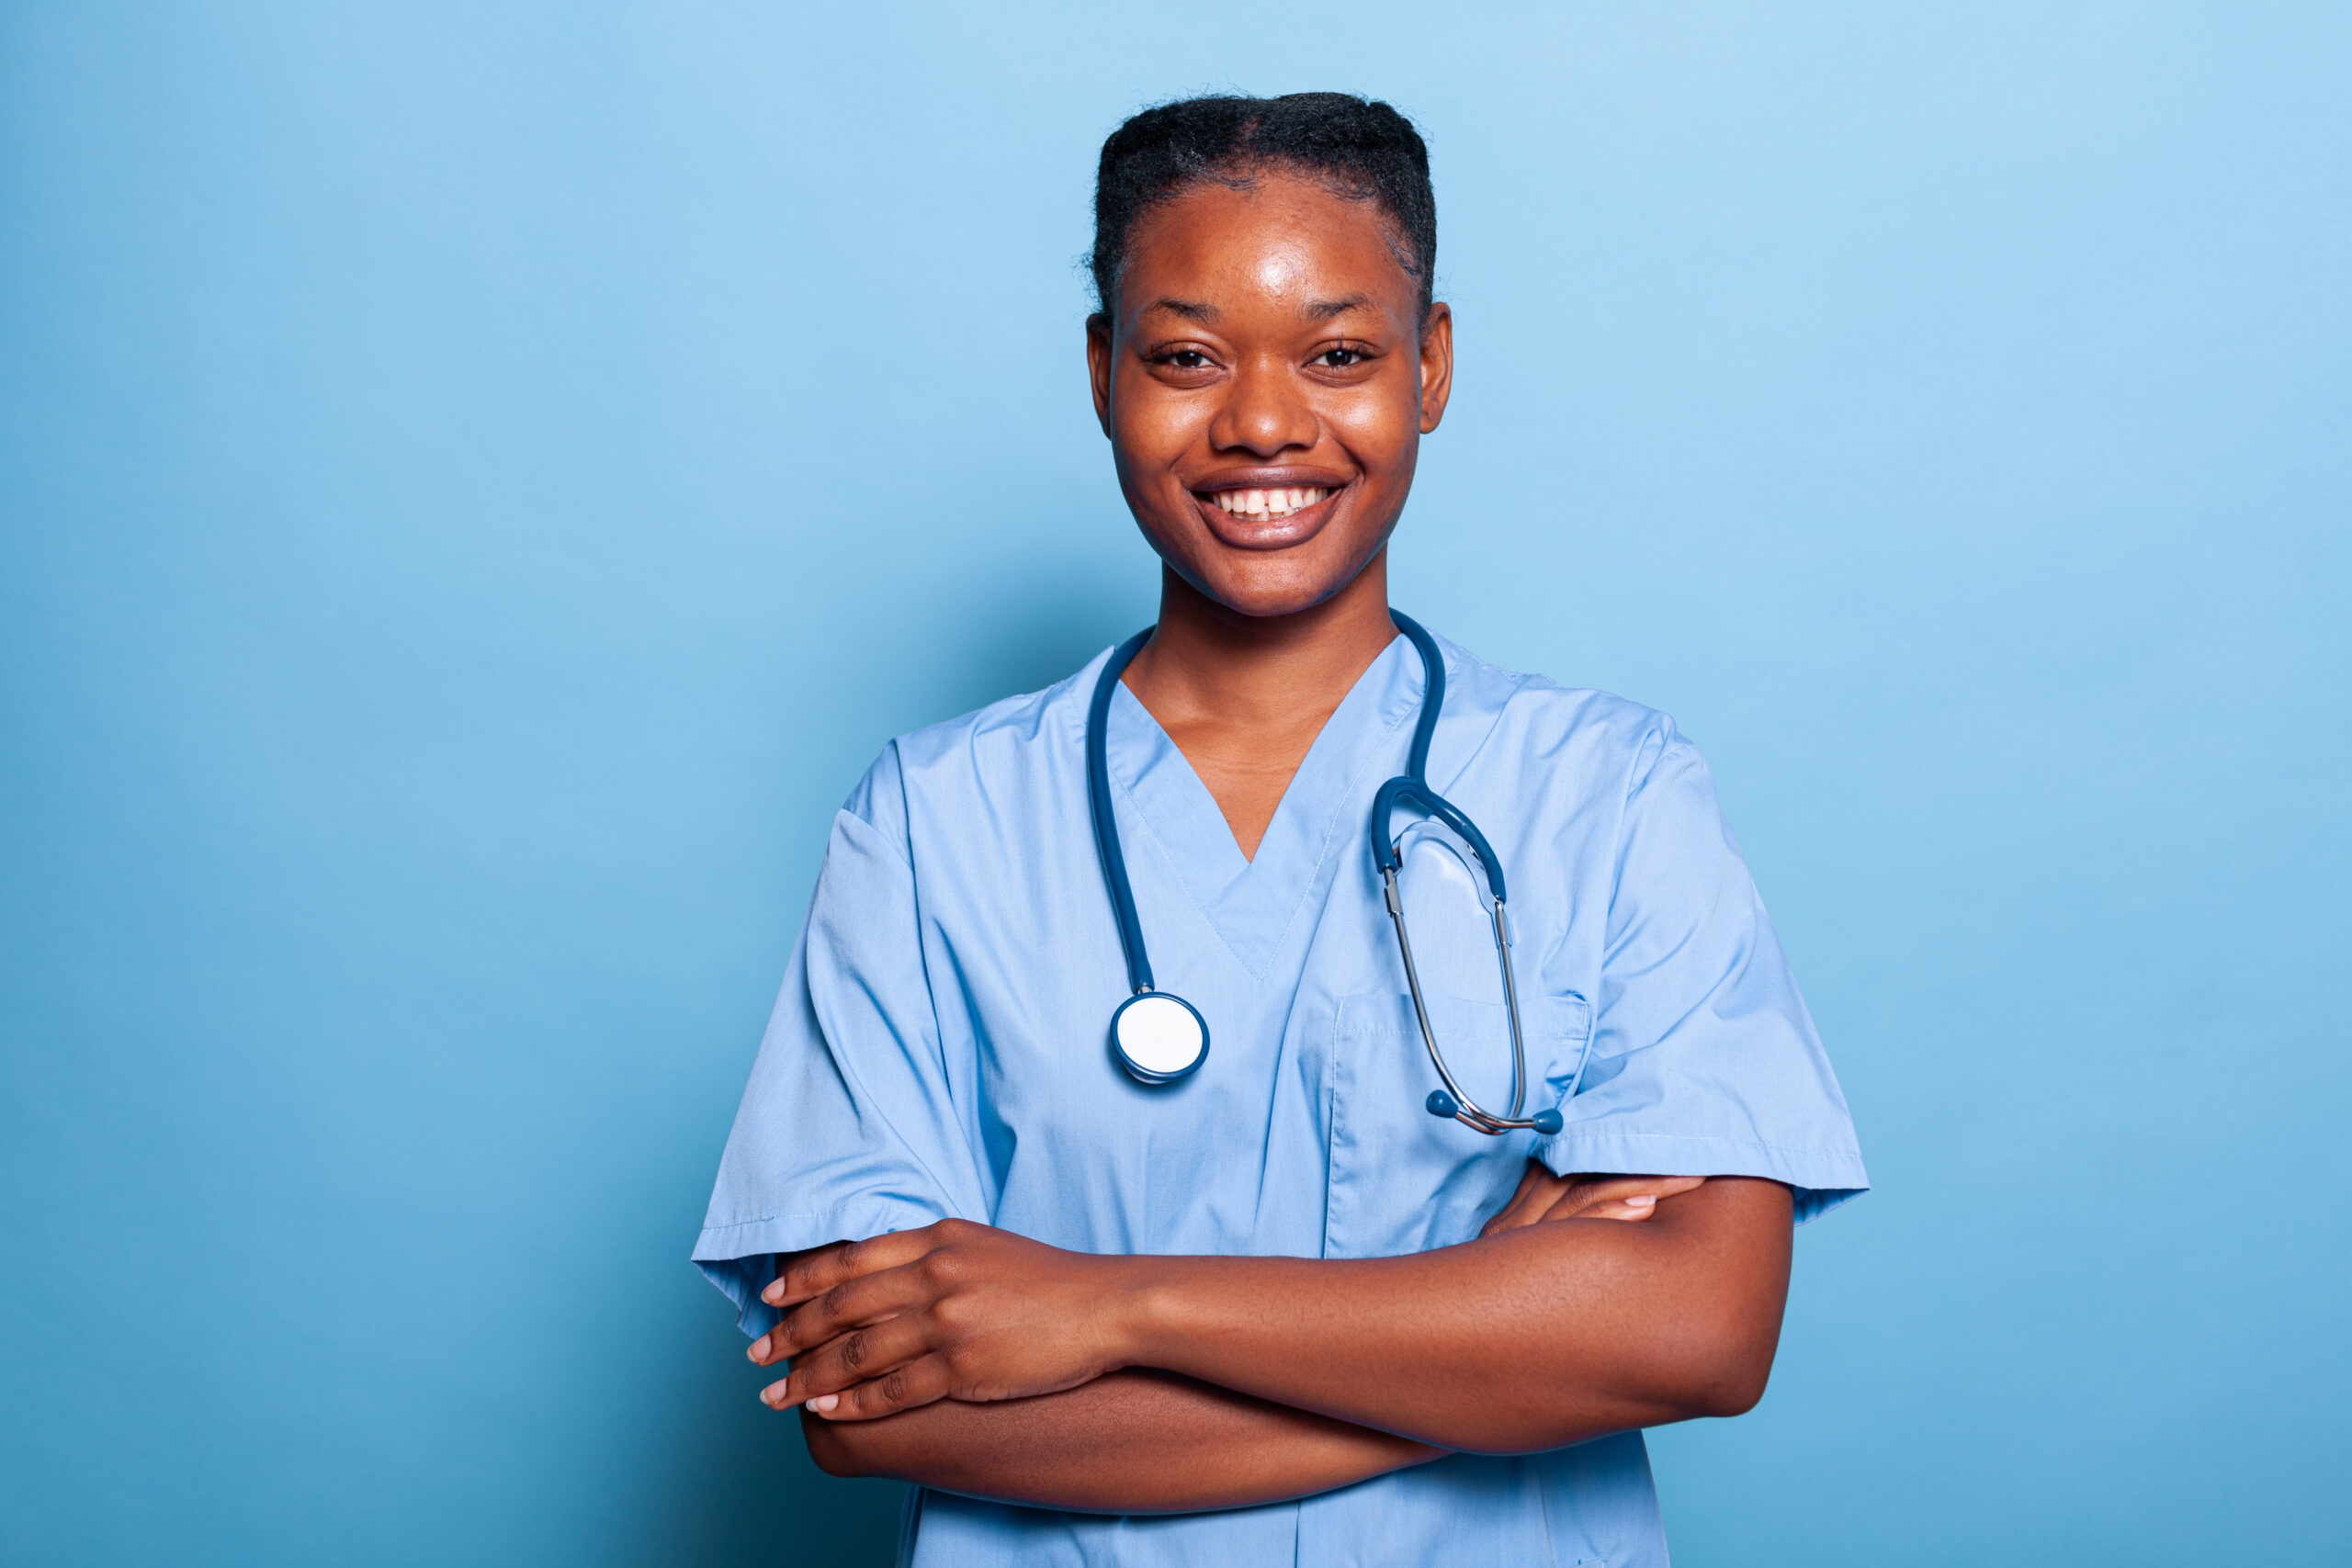 Portrait of african american practitioner nurse smiling at camera working at illness expertise in studio with blue background. Therapist woman in medical uniform and stethoscope. Medicine concept